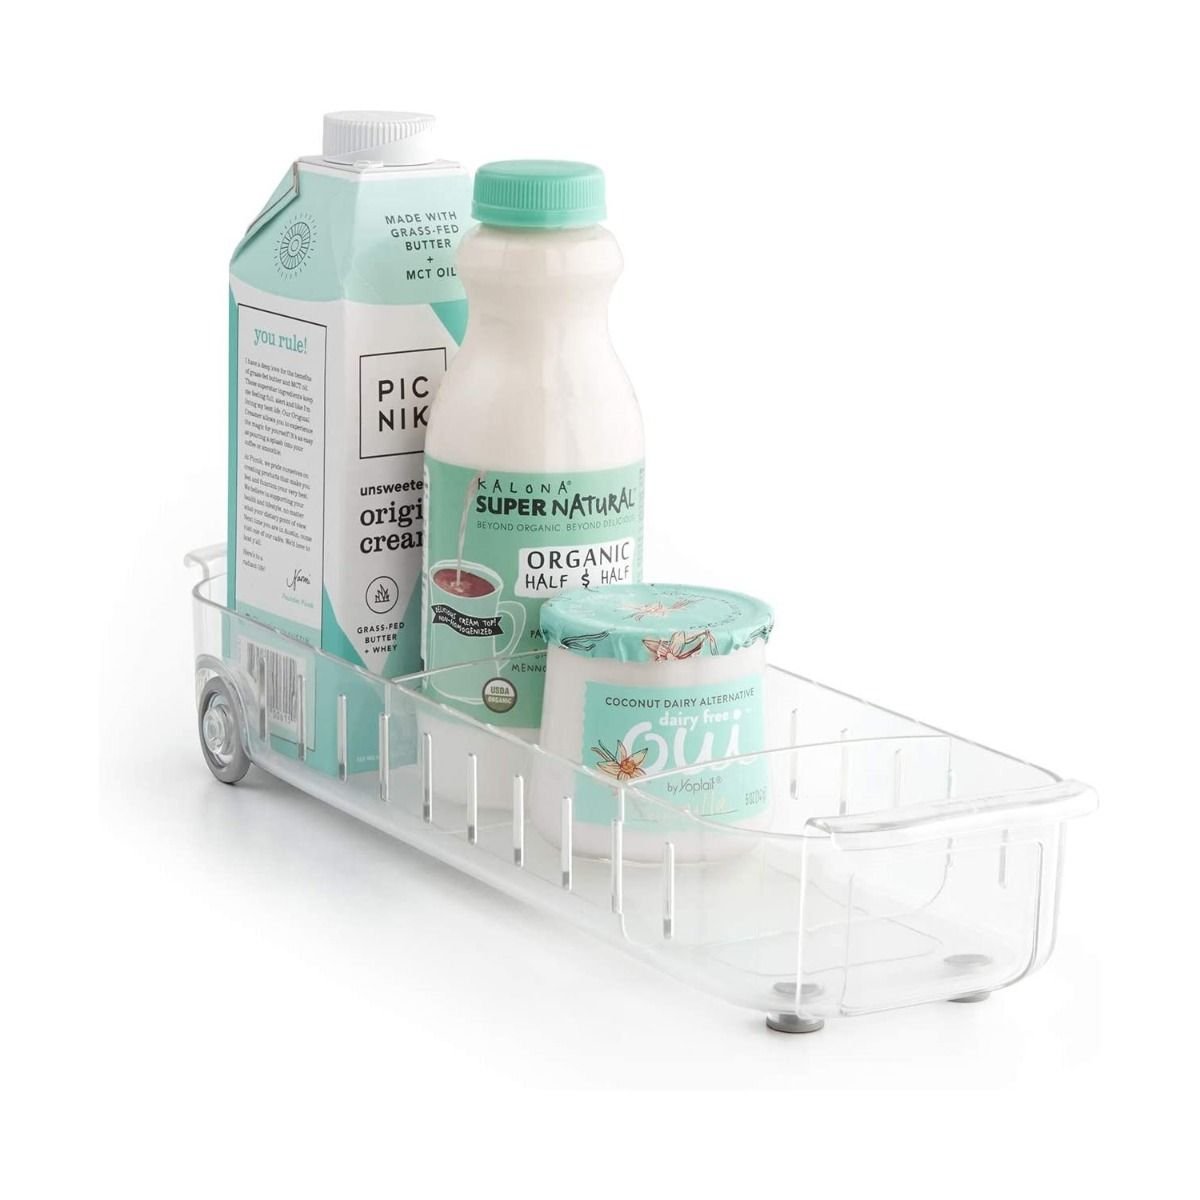 YouCopia SinkSuite Cleaning Caddy